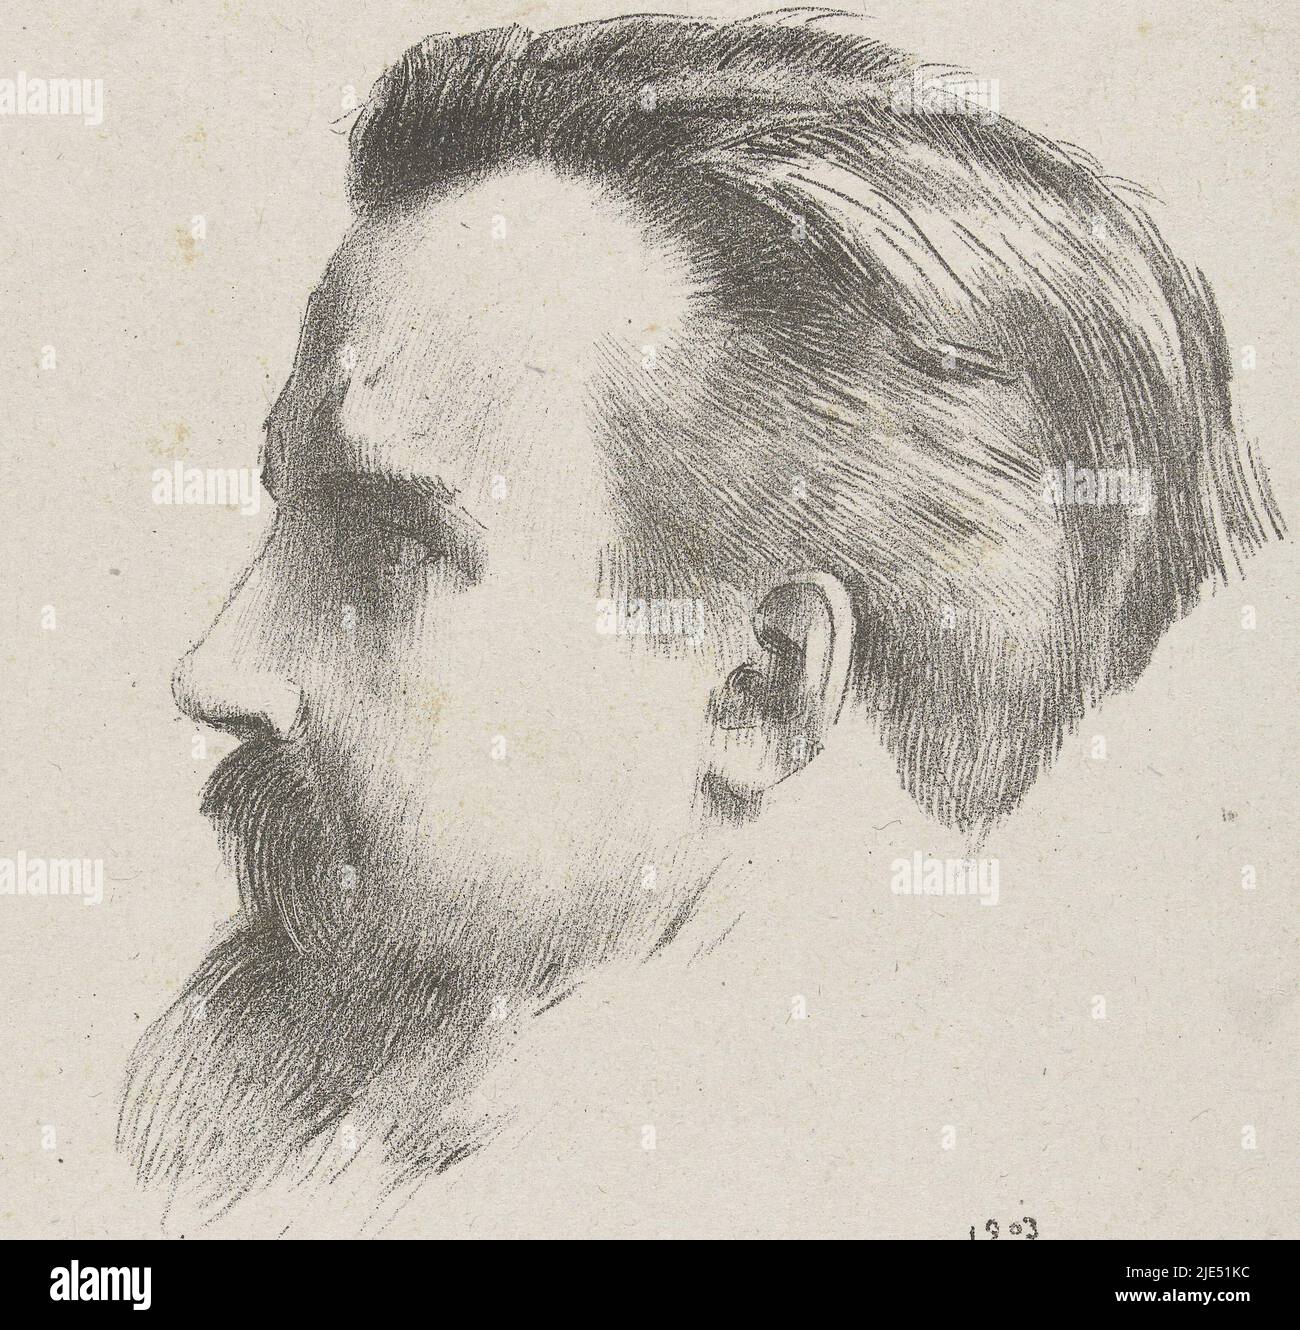 Portrait of the French painter Maurice Denis, Portrait of Maurice Denis, print maker: Odilon Redon, printer: Blanchard, print maker: France, printer: Paris, 1903 Stock Photo